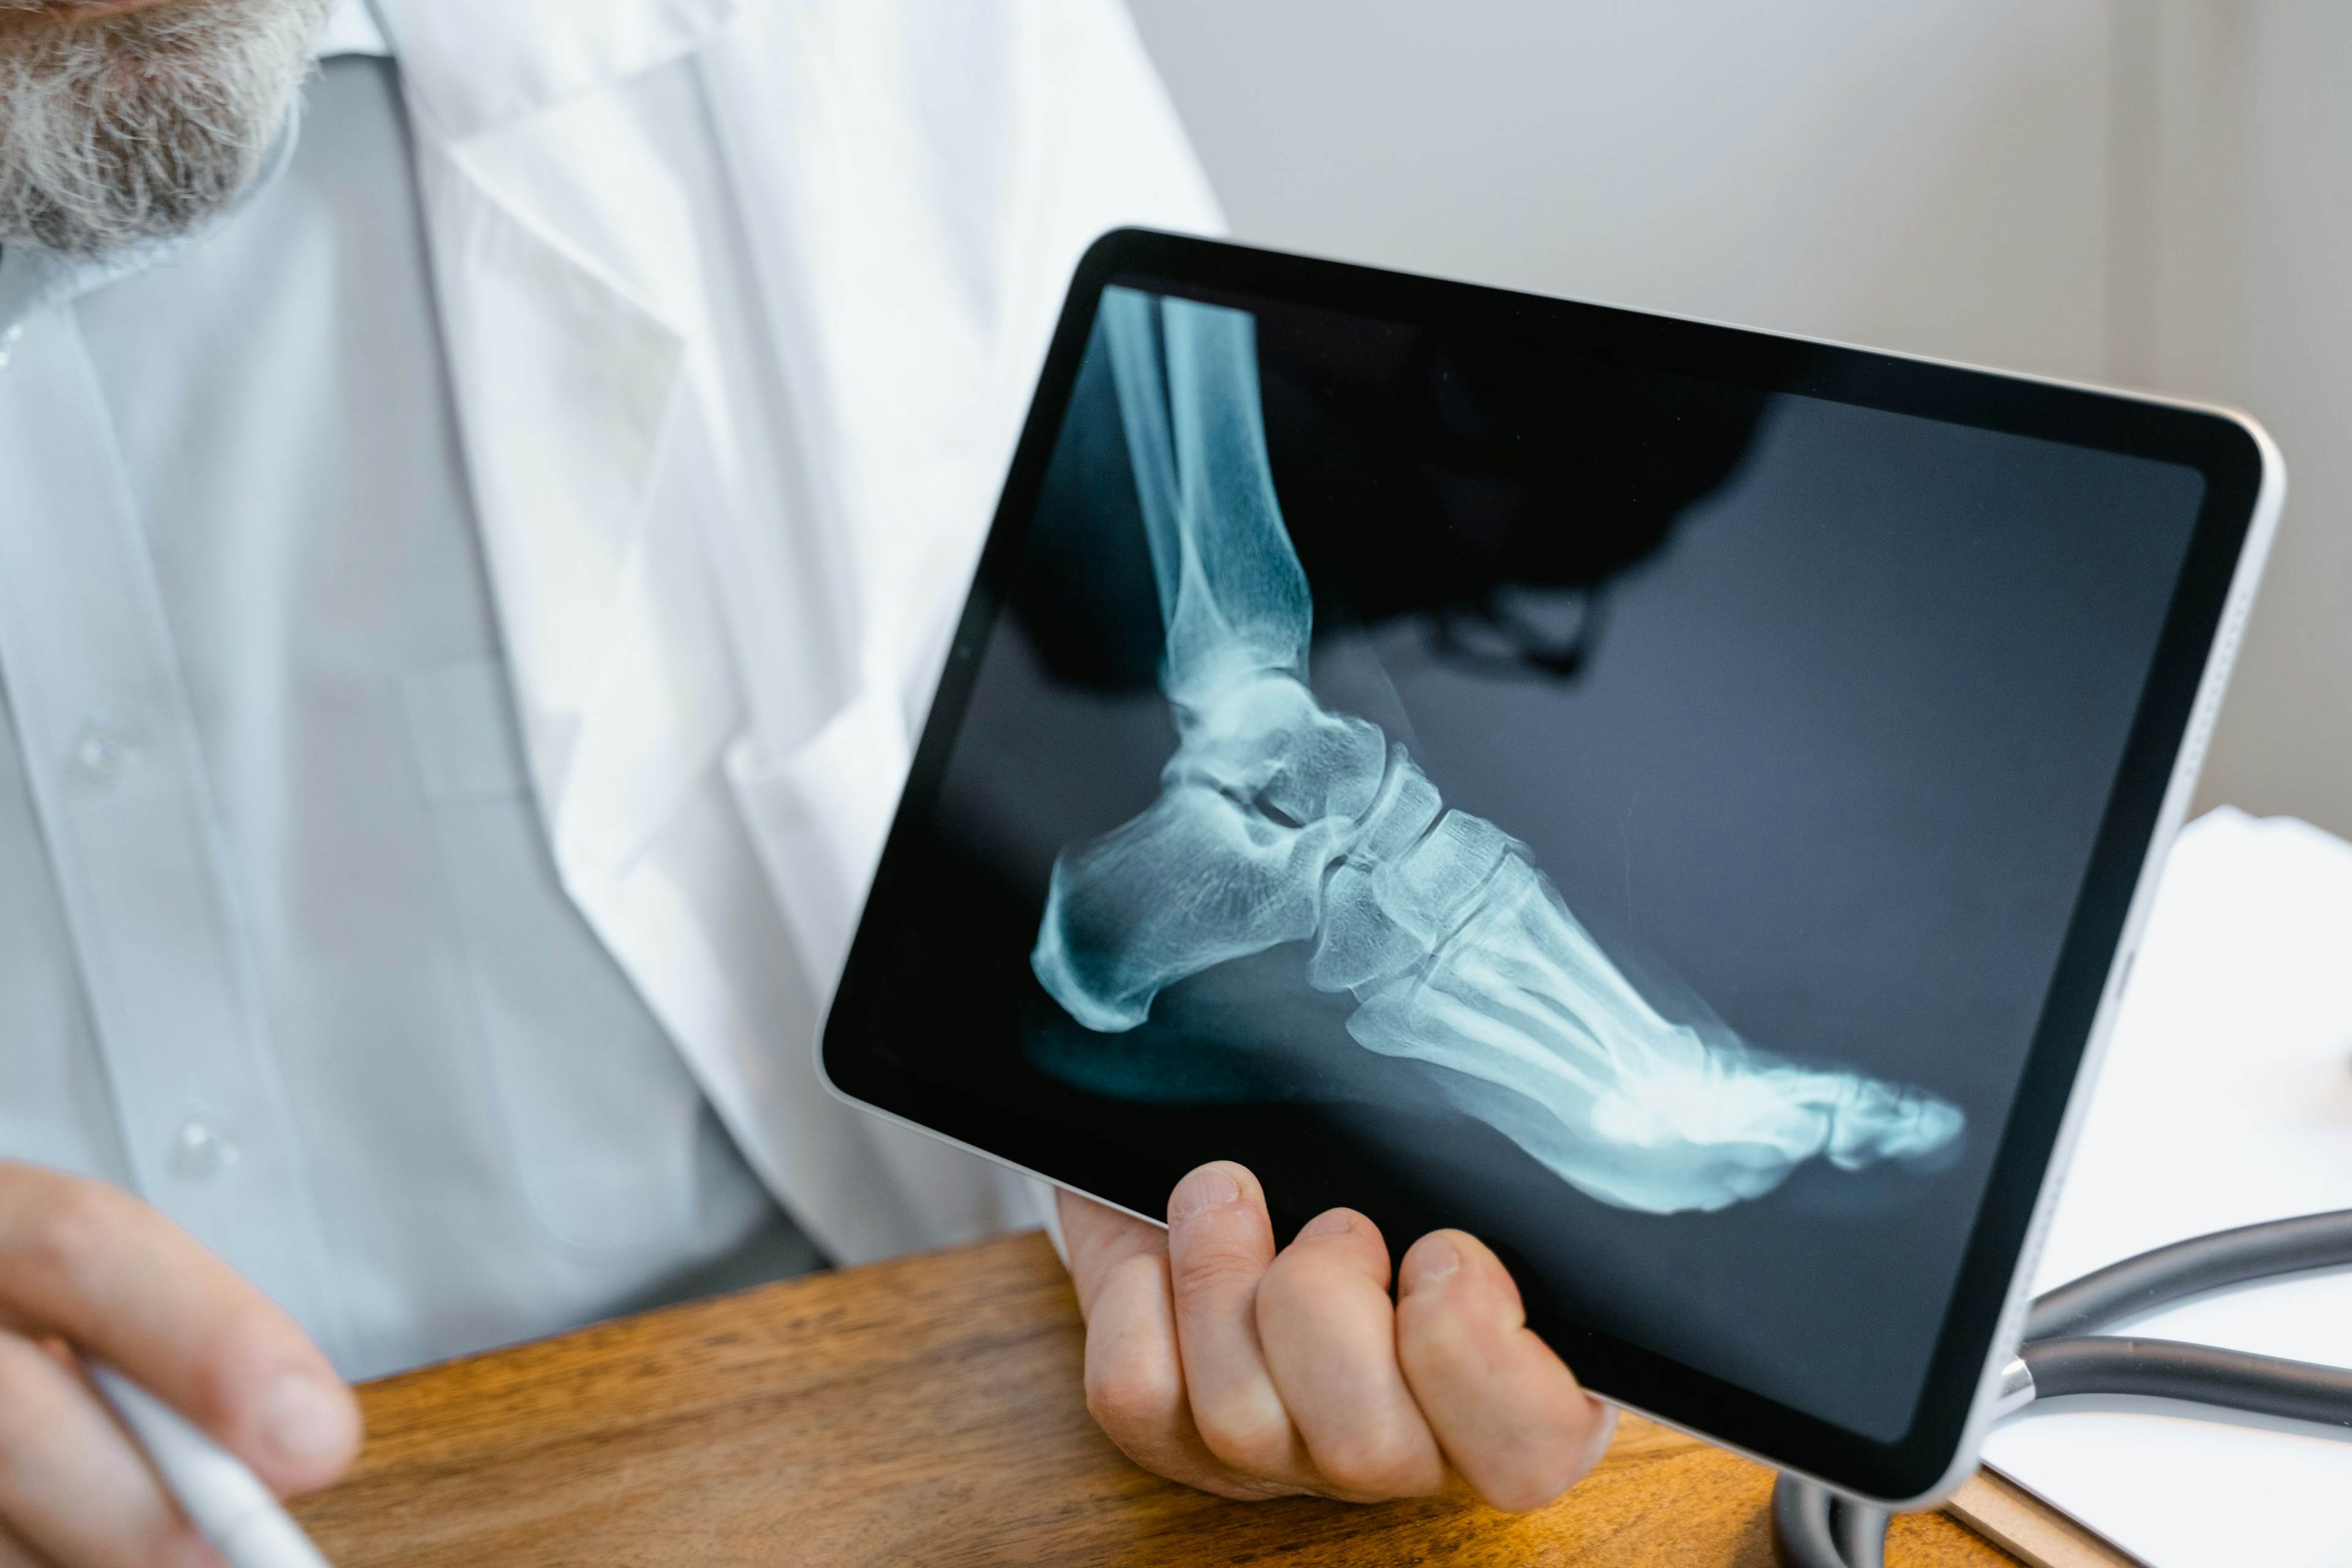 Foot x-ray displayed on tablet